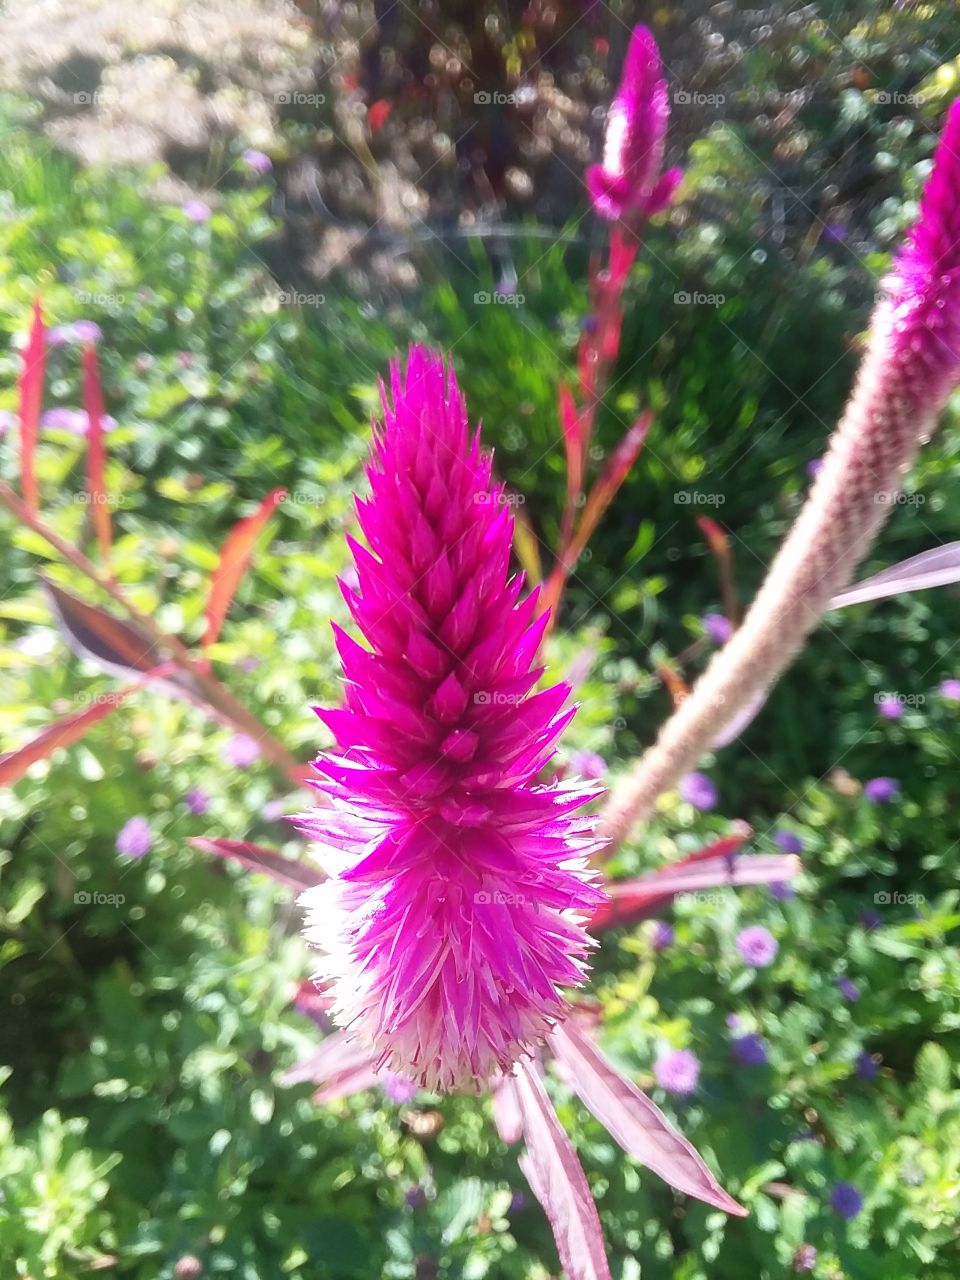 A tall magenta flower, illuminated in the afternoon sun.